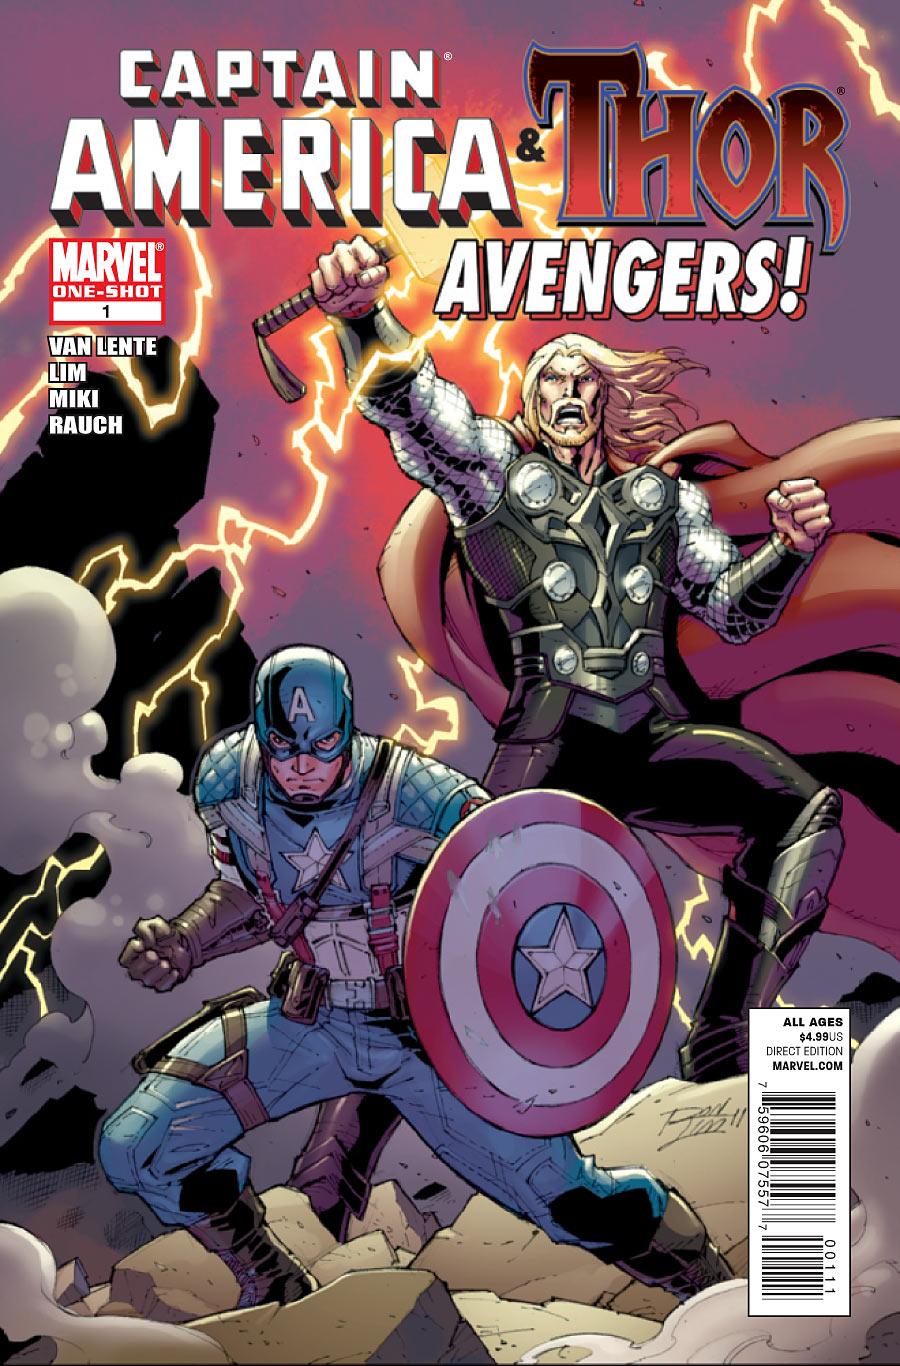 Cap and Thor! Avengers Vol. 1 #1